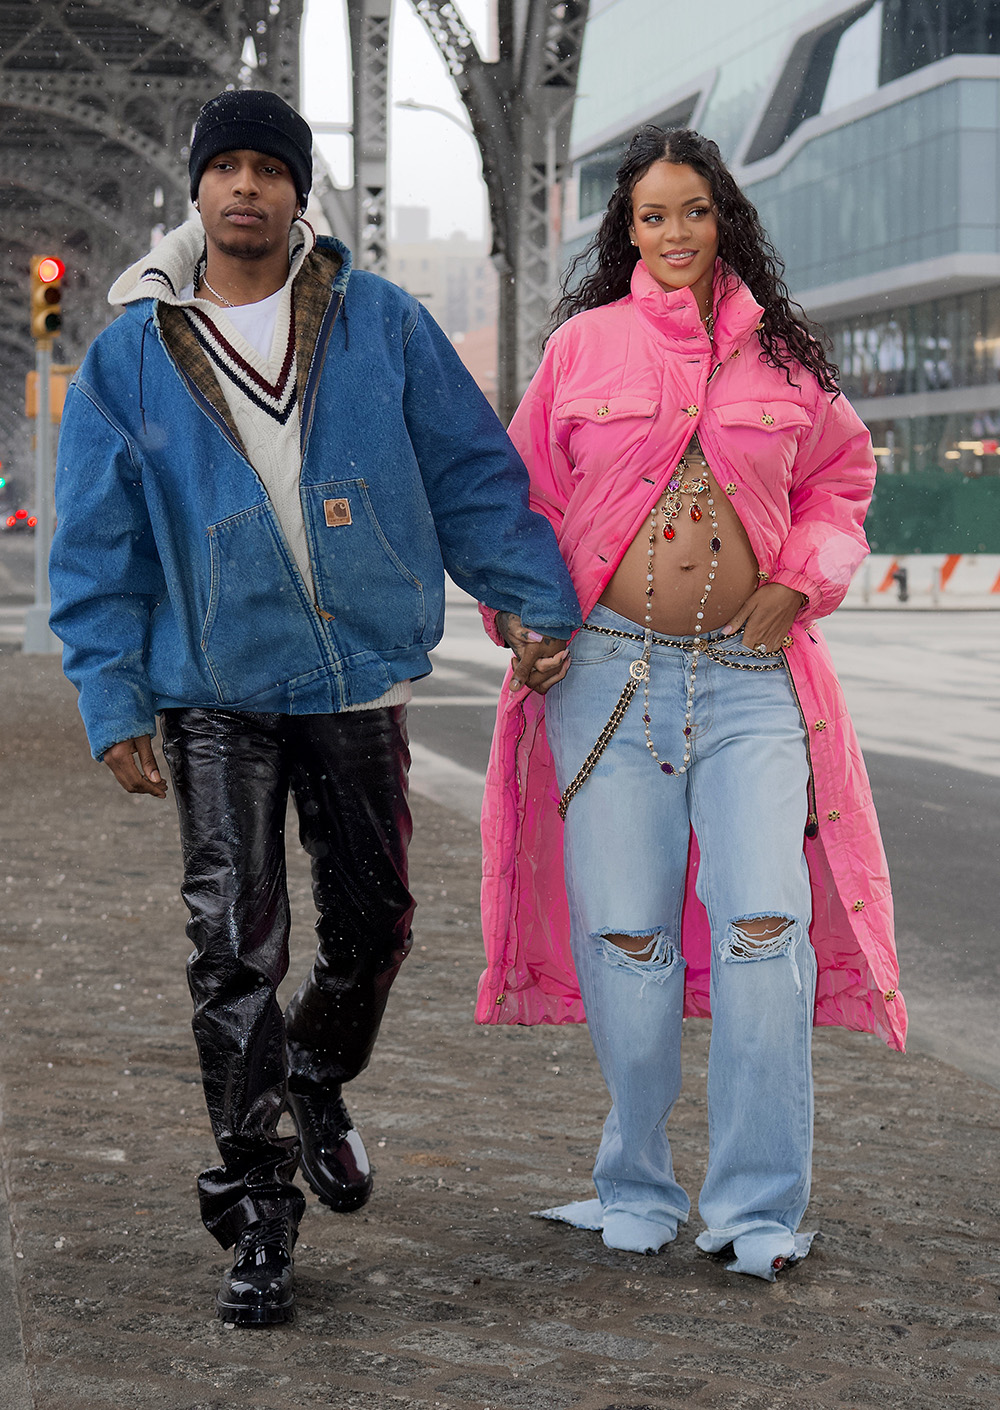 A$AP Rocky Adds His Touch Of Street Style To The End Of New York